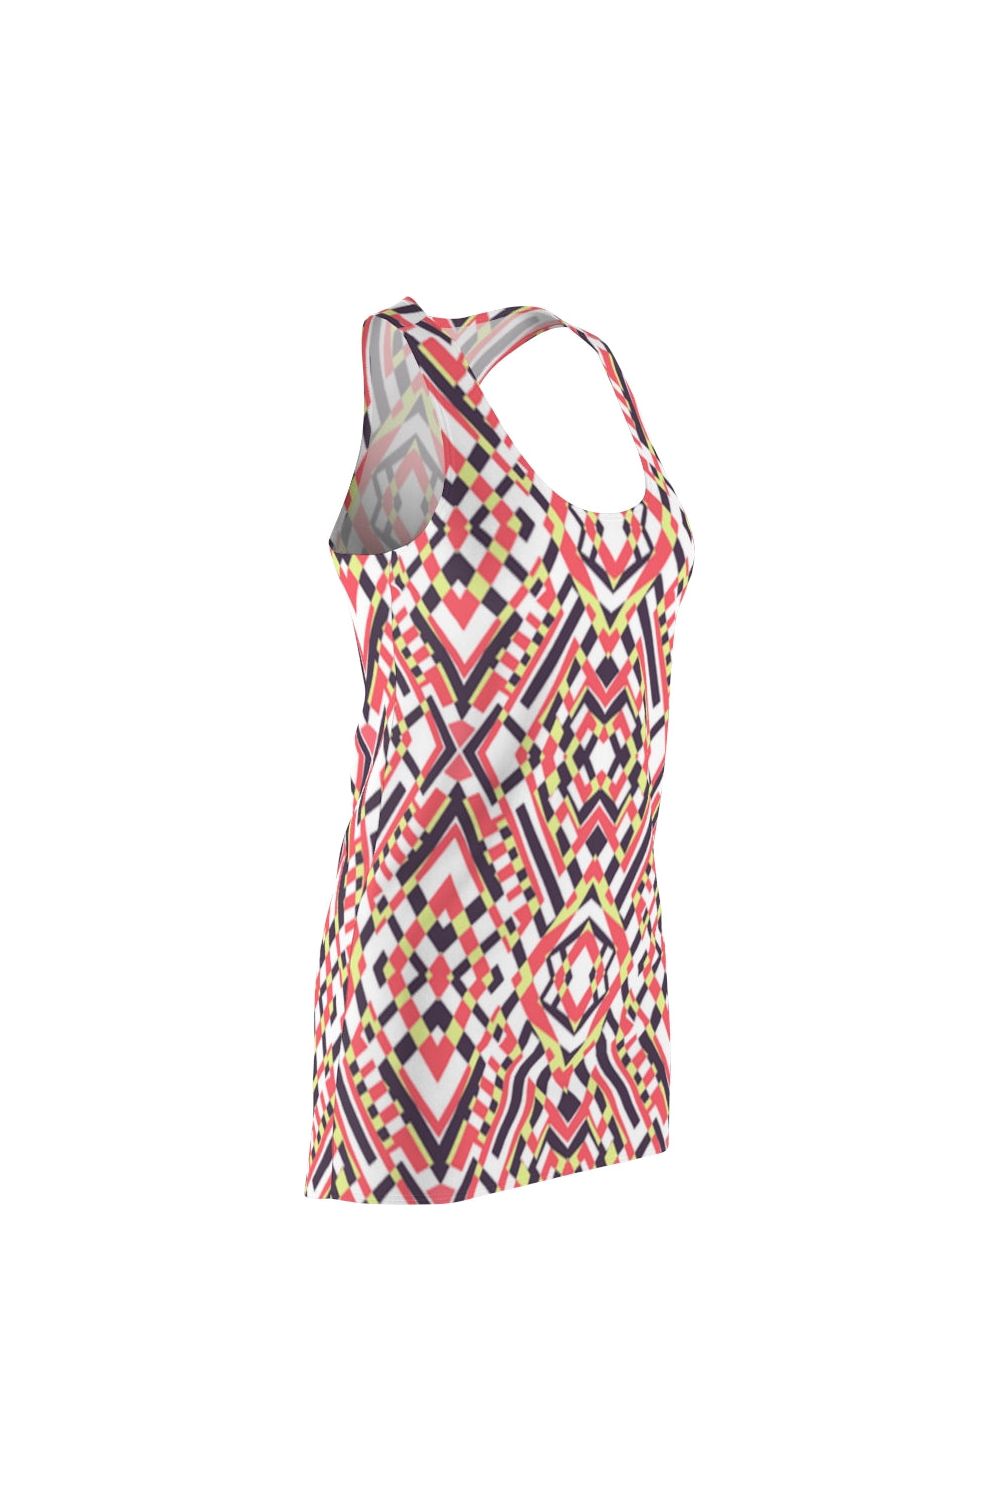 Women's Pink and White Racerback Dress